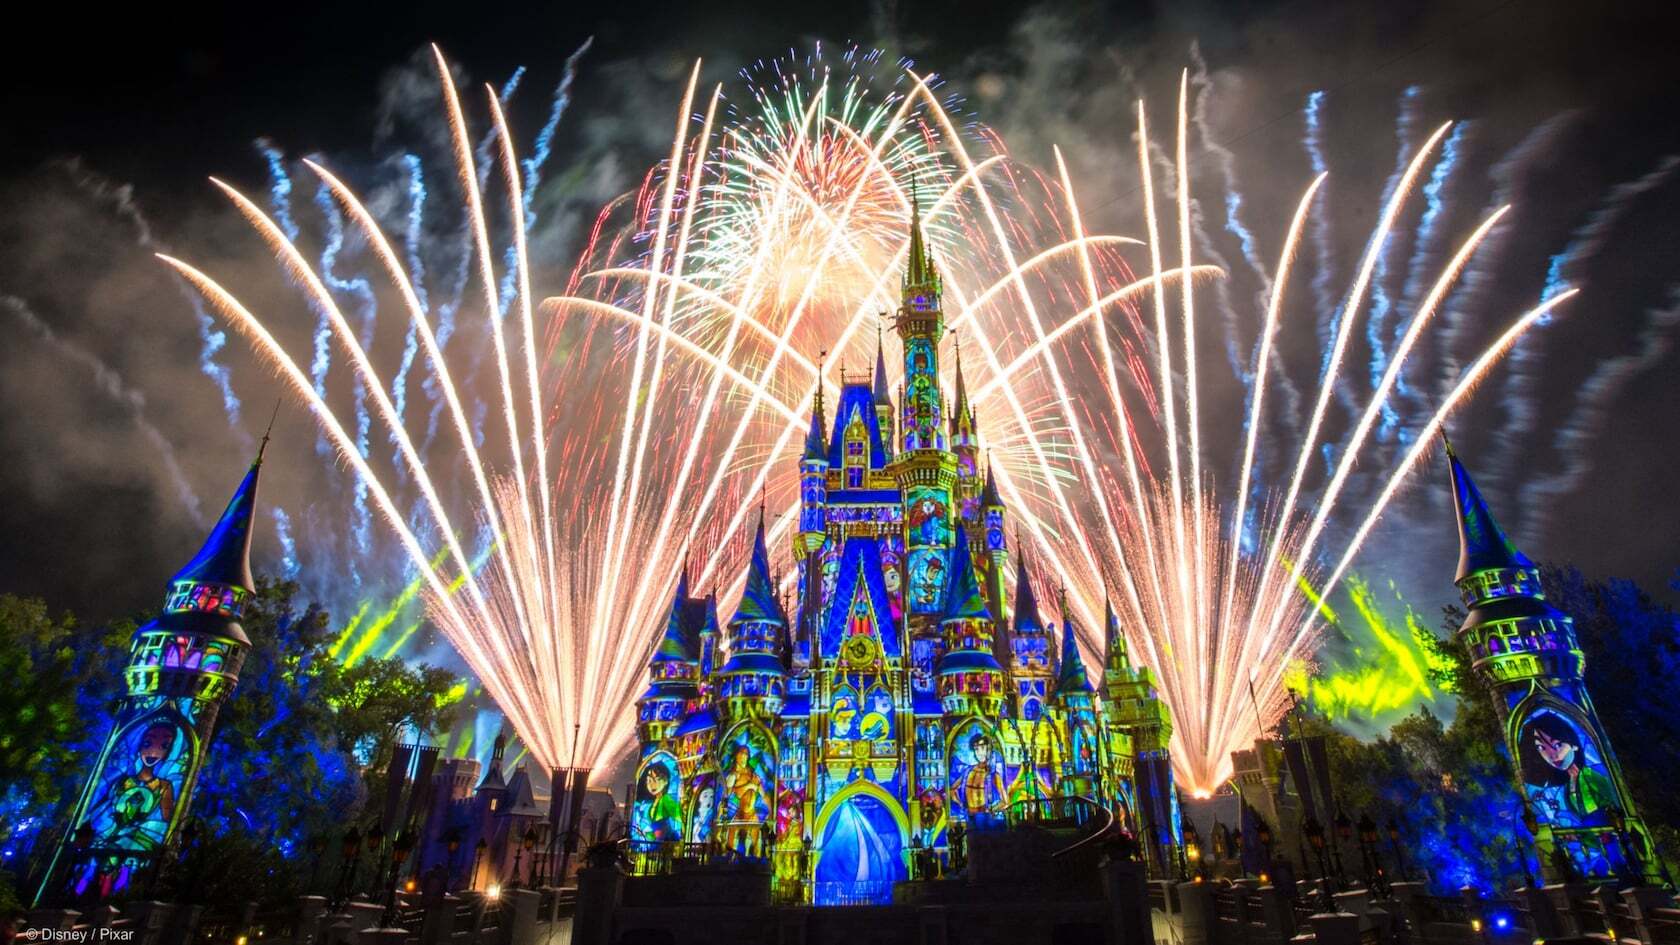 Happily Ever After fireworks finale at Magic Kingdom at Walt Disney World Resort was posted to TikTok from Disneys Contemporary Resort at California Grill.